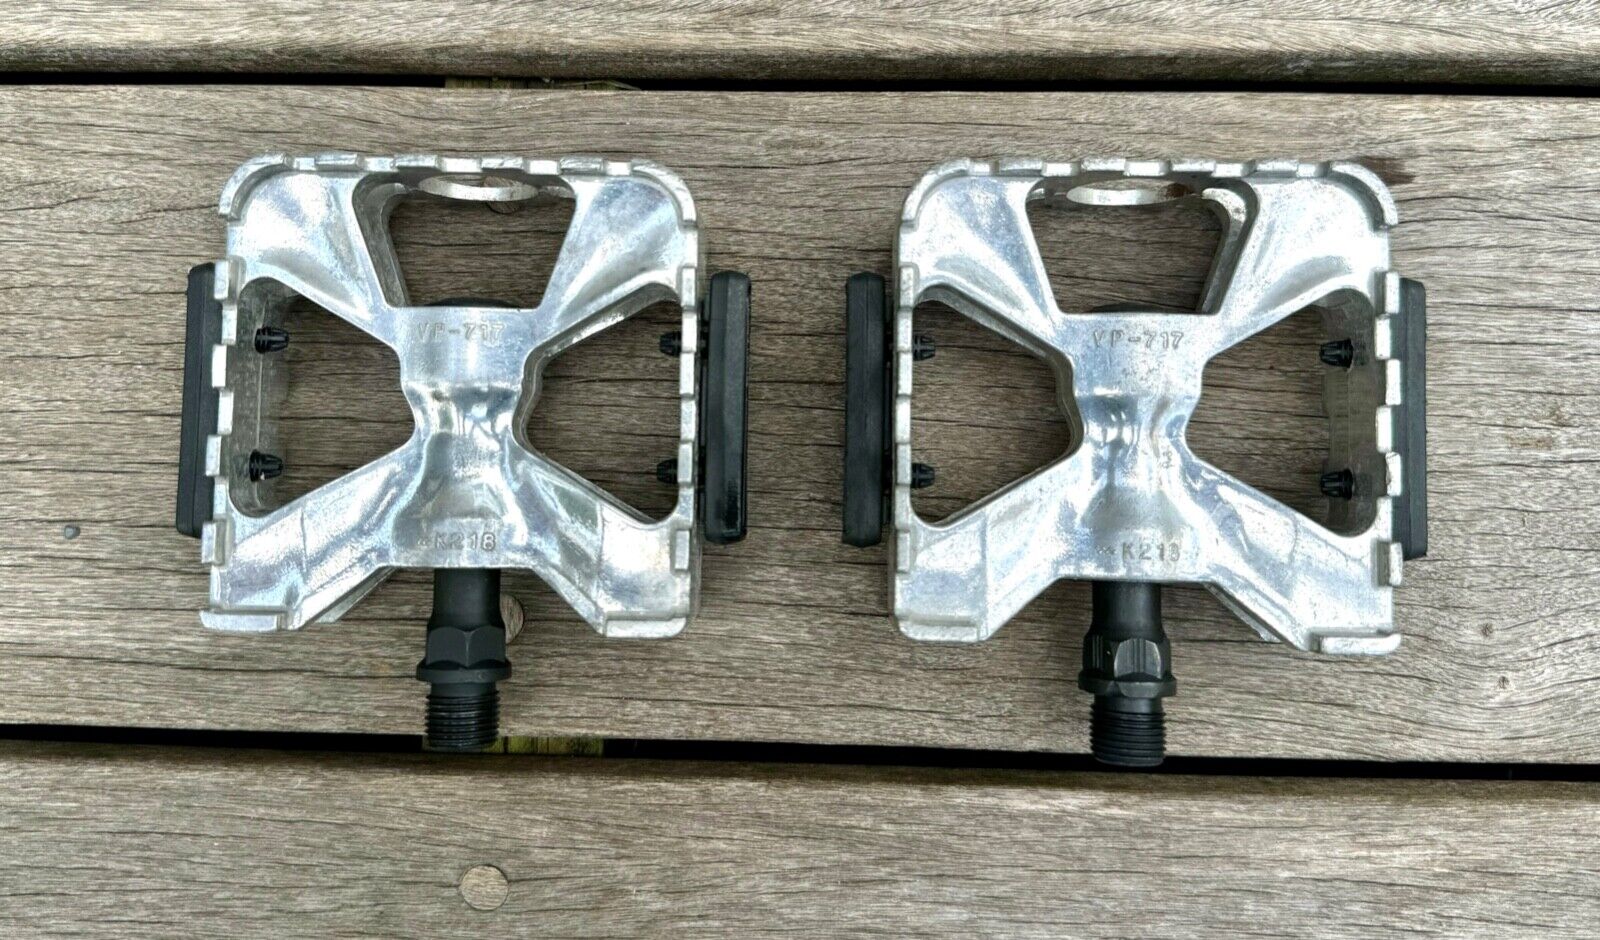 A pair of Schwinn Stingray Chopper Orange County Choppers Bicycle Pedals Silver